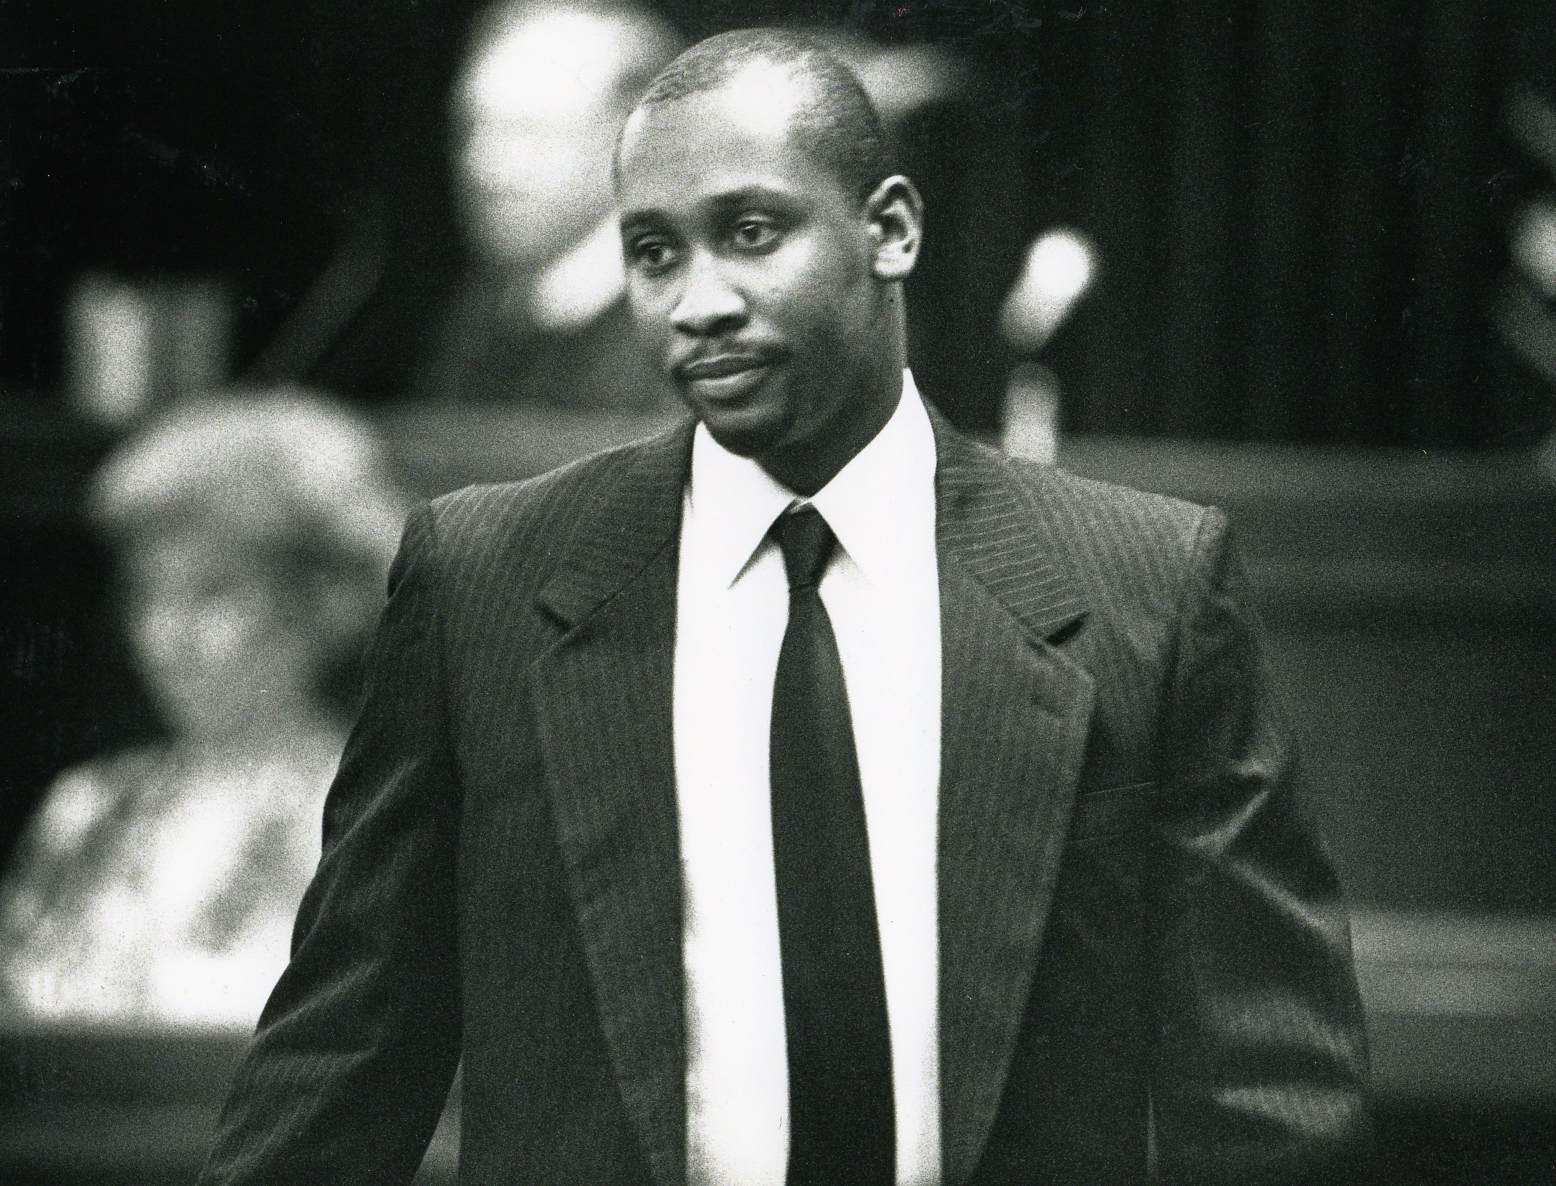 Troy Anthony Davis entering Chatham County Superior Court on Aug. 22, 1991, during his trial. (Image: AP Photo/Savannah Morning News)